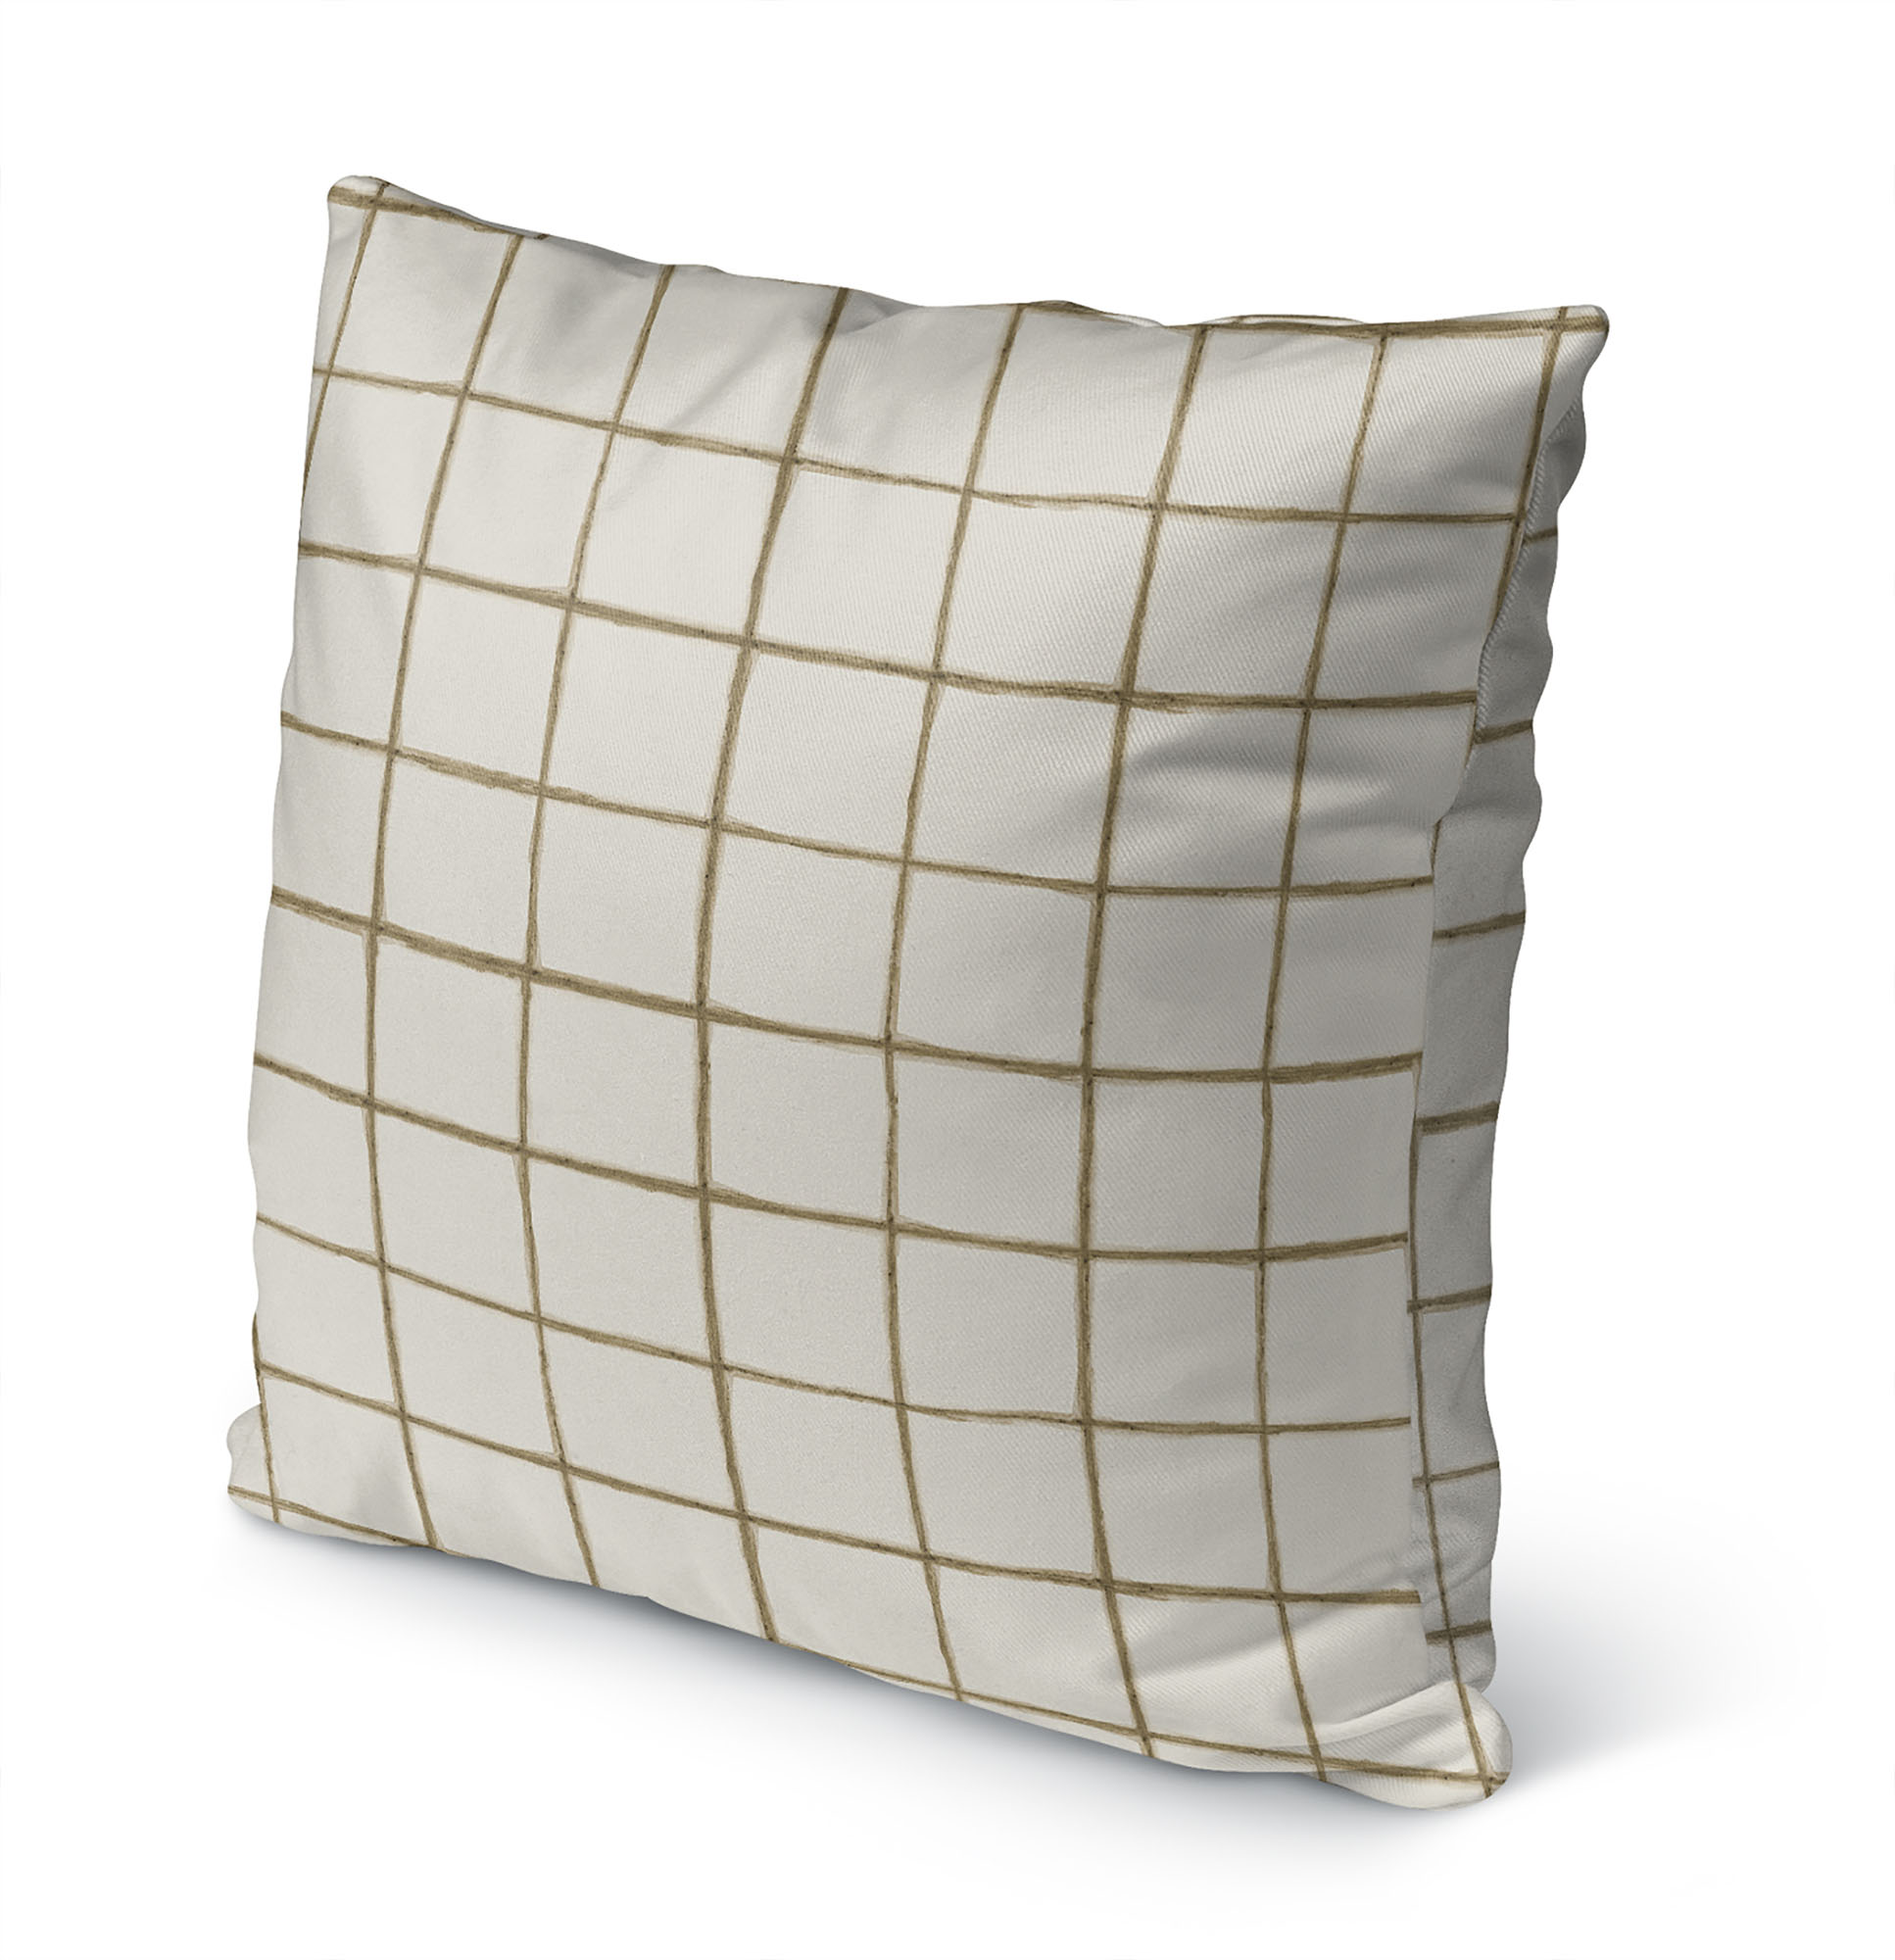 Watercolor Check Beige Outdoor Pillow by Kavka Designs - image 3 of 5